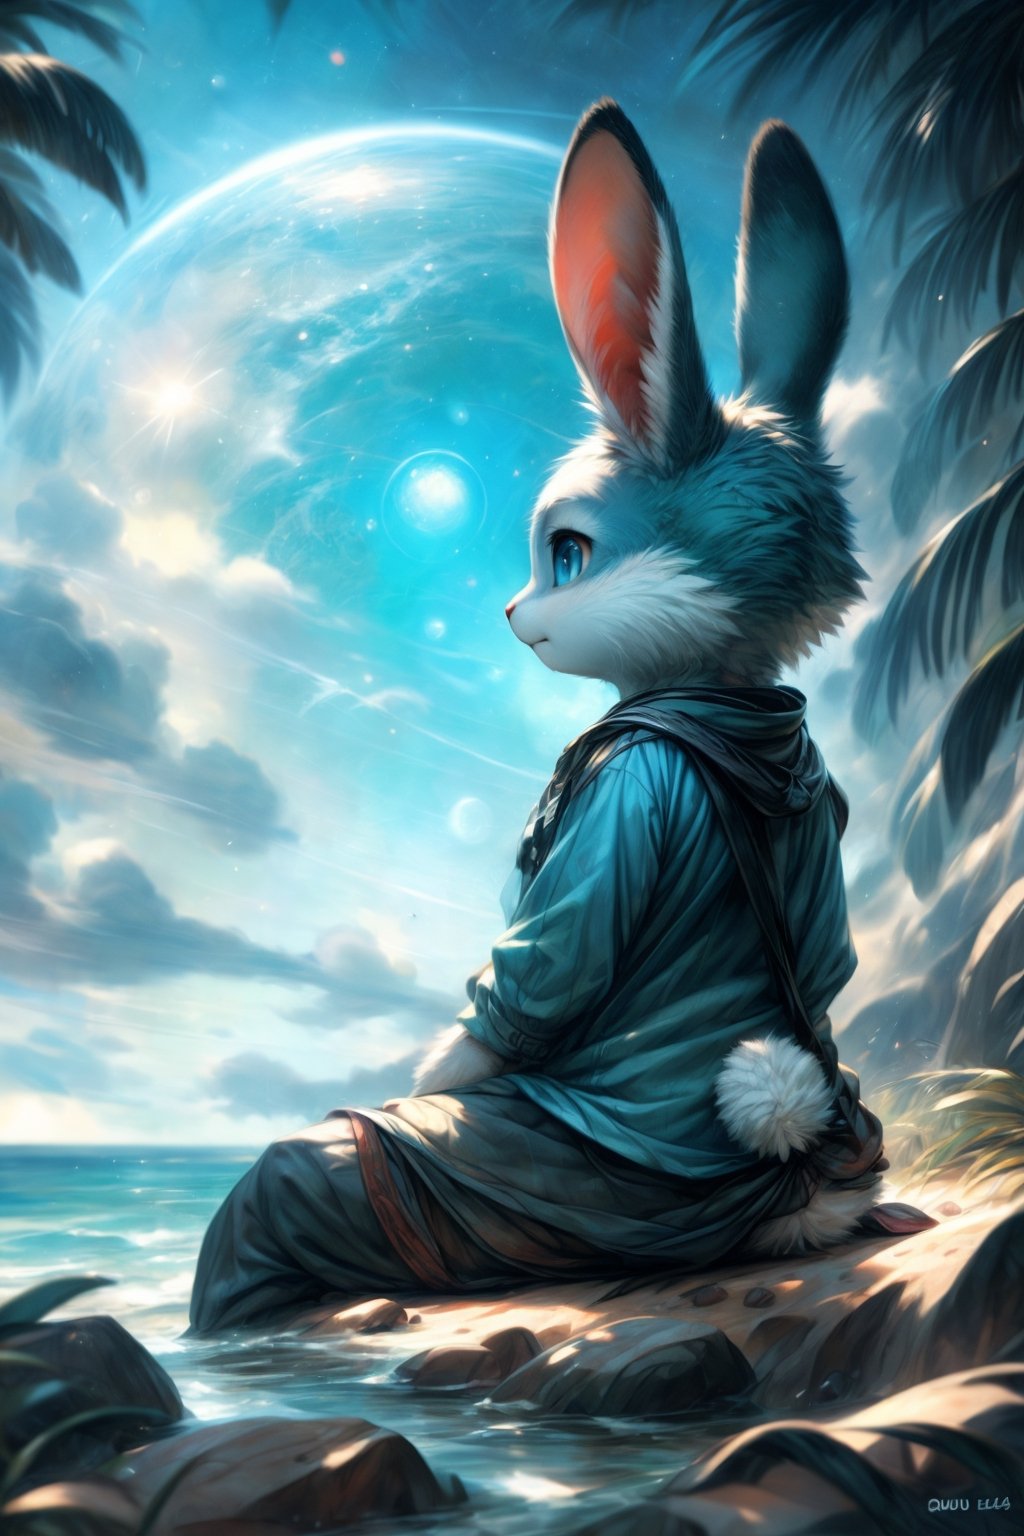 by kenket, by totesfleisch8, (by thebigslick, by silverfox5213:0.8), (by syuro:0.2), (by qupostuv35:1.2), (hi res), ((masterpiece)), ((best quality)), illustration,anthro,furry,kemono,bunny,rabbit,animal ears, body fur,1girl,planet earth in the sky,blue hair,bobbed hair,sea blue eyes, flowing light blue dress,beach,moonflowers,exposure blend, medium shot, bokeh, furry rabbit nose, (hdr:1.4), high contrast, (cinematic, sea blue and sea green:0.85), (muted colors, dim colors, soothing tones:1.3), low saturation, (hyperdetailed:1.2), (noir:0.4),FurryCore